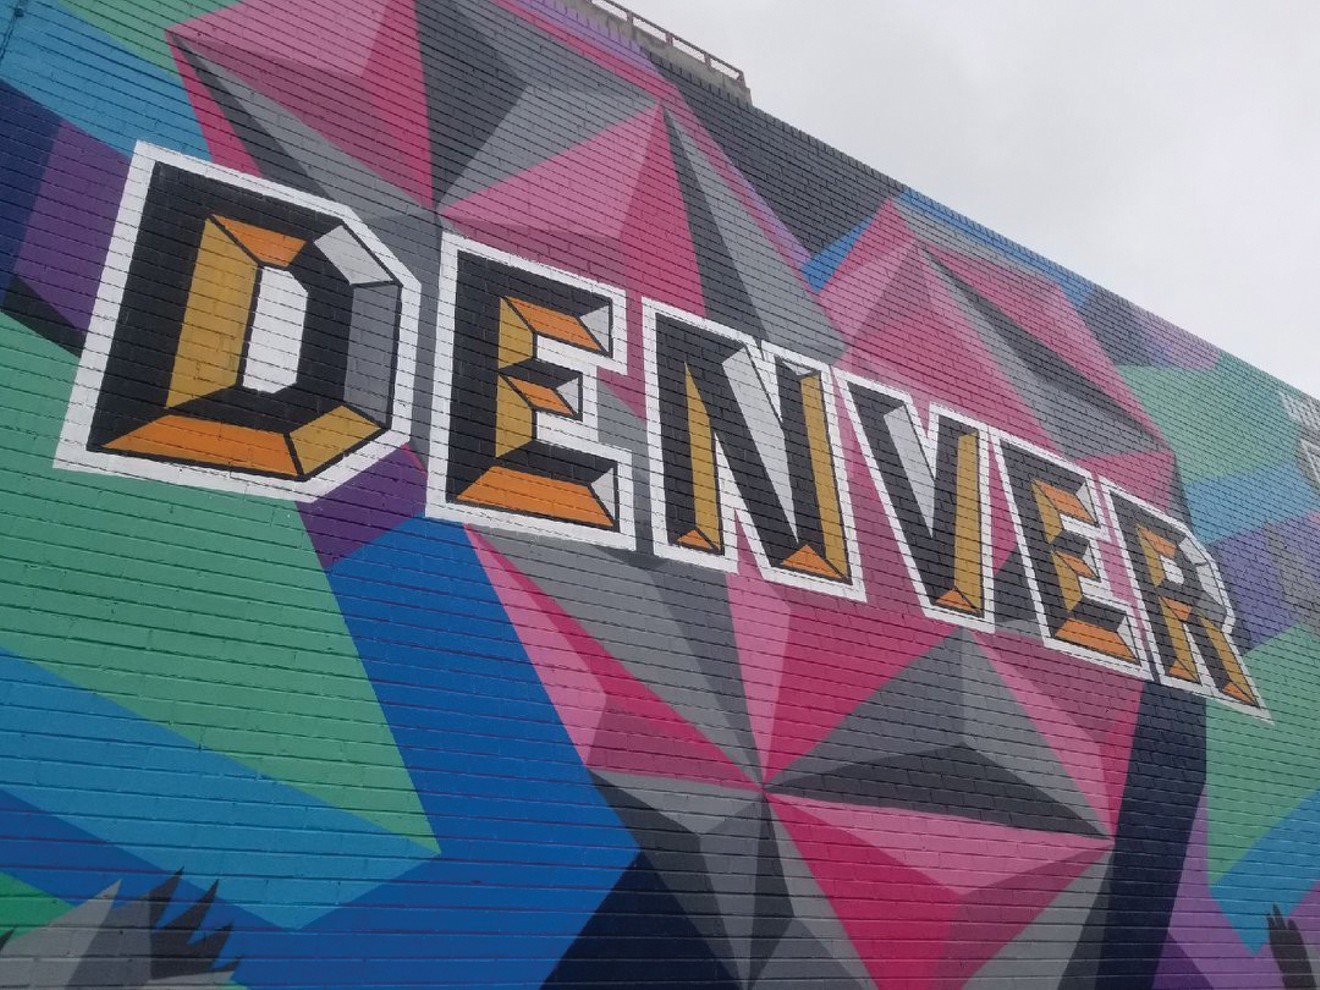 Fall in love with a different side of Denver during the Denver Graffiti Tours.